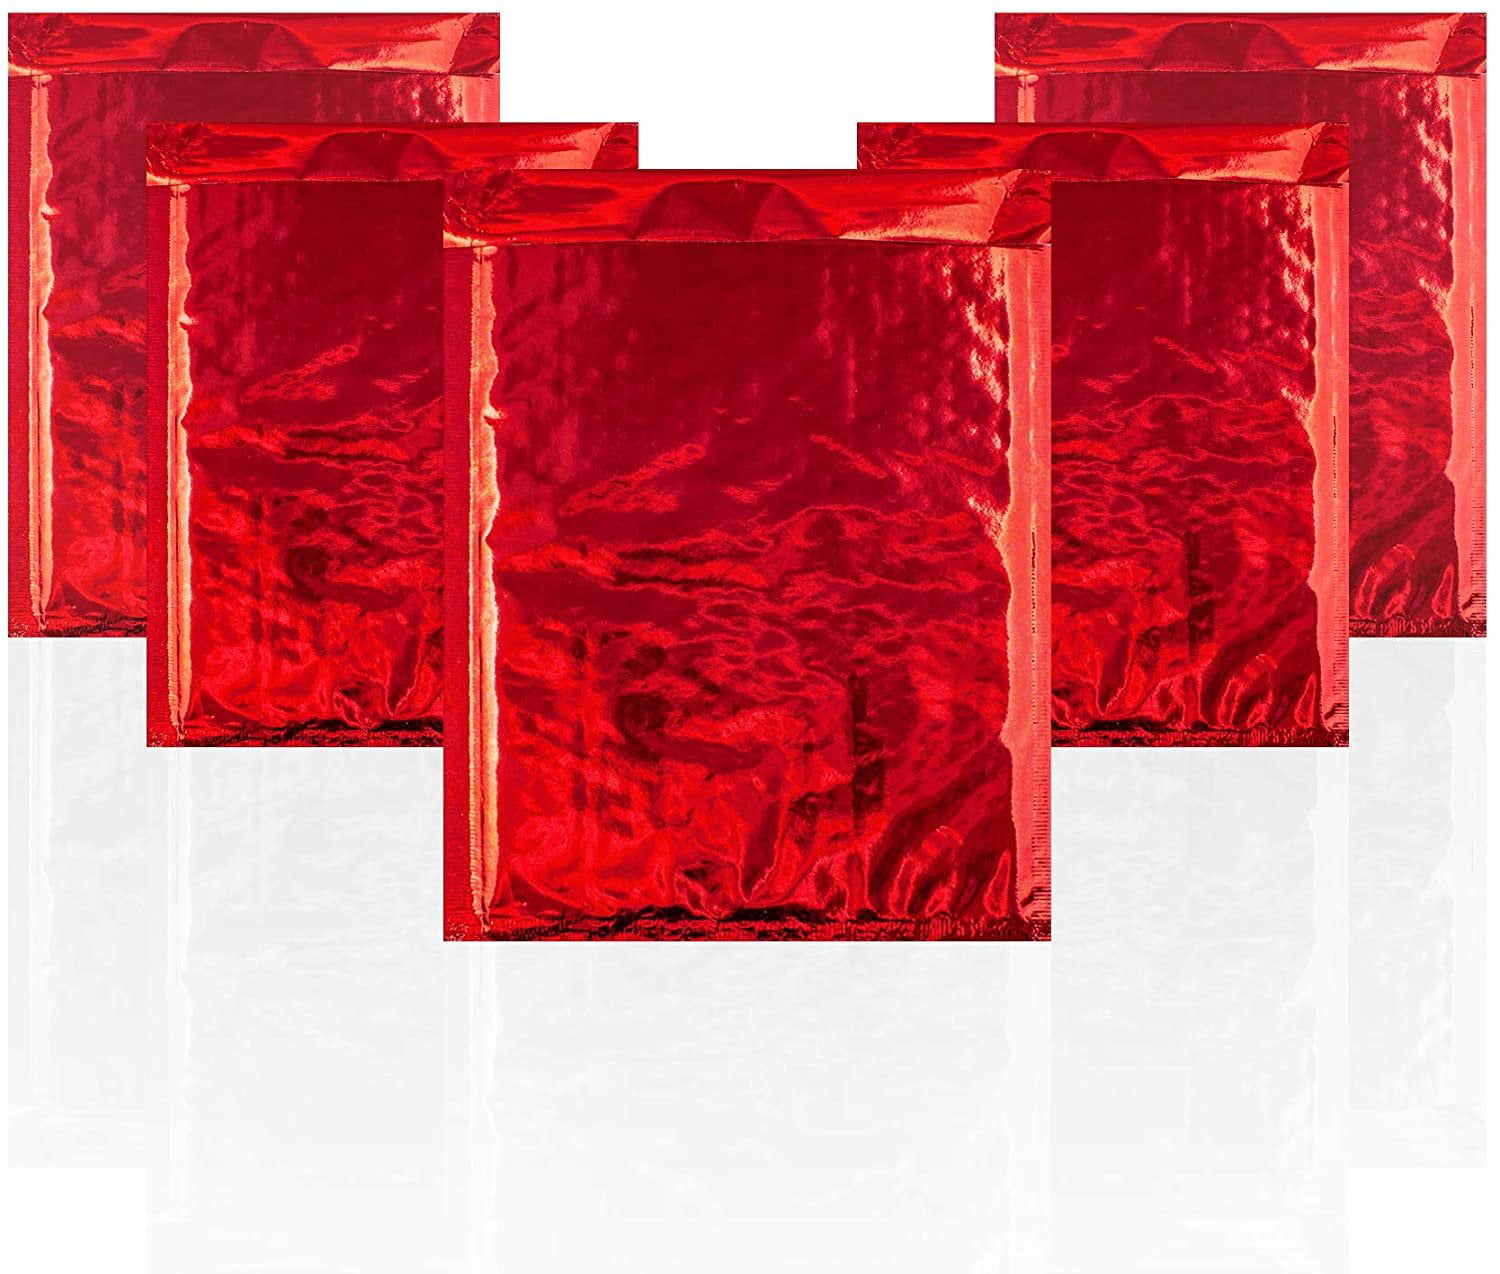 AMZ Pack of 10 Red Metallic Bubble Mailers 6 x 6.25 Red Padded Envelopes 6 x 6 1/4 Glamour Bubble Mailers Peel and Seal Envelopes Shipping Bags for Mailing Packing Packaging Wholesale Price